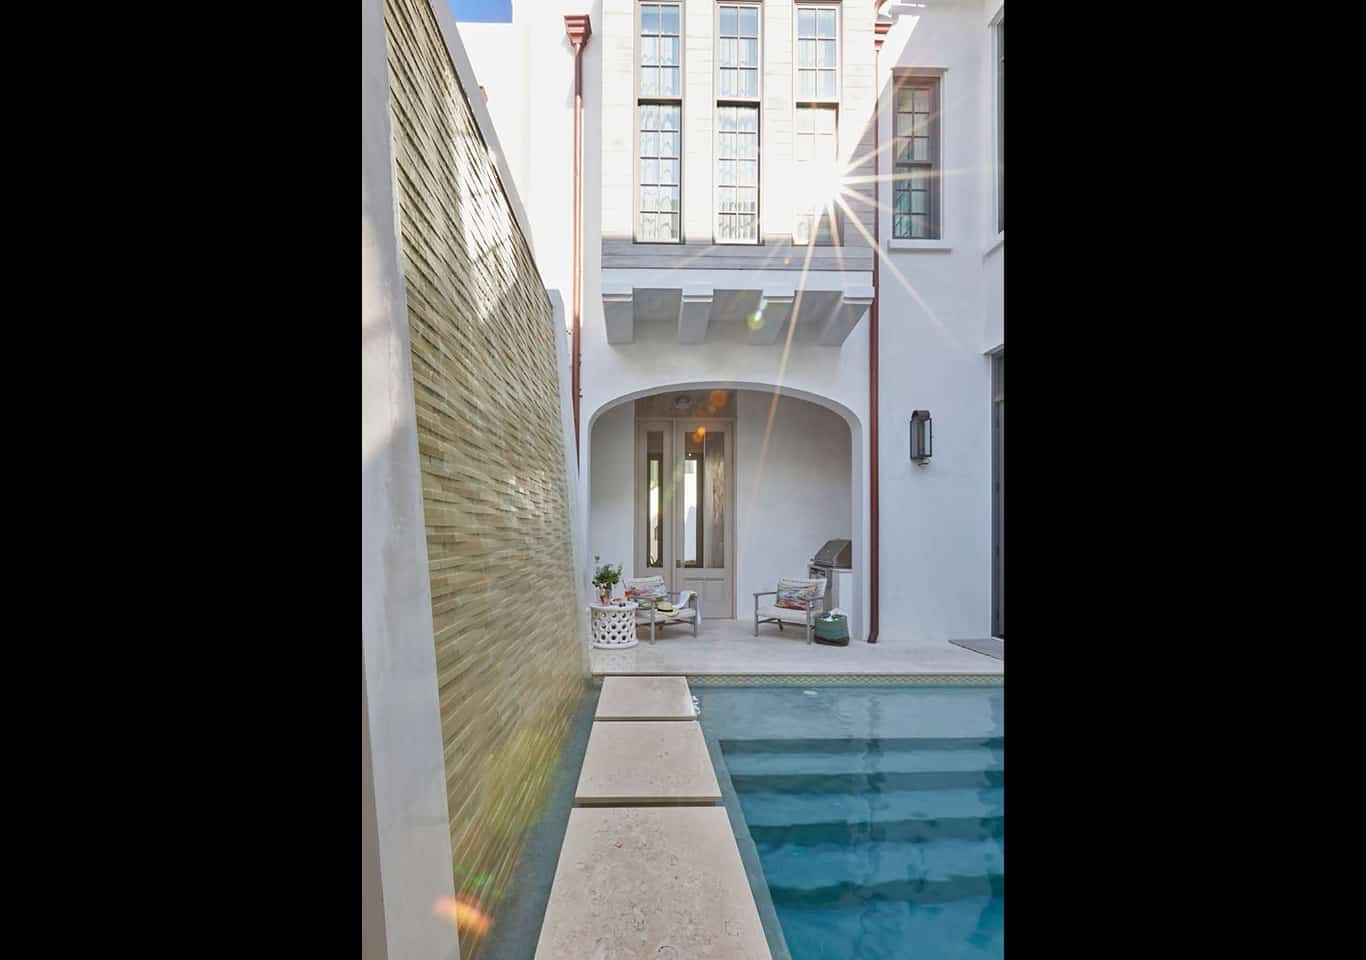 Alys Beach Home, Marianne Temple & Robyn Prince / Home Design Group